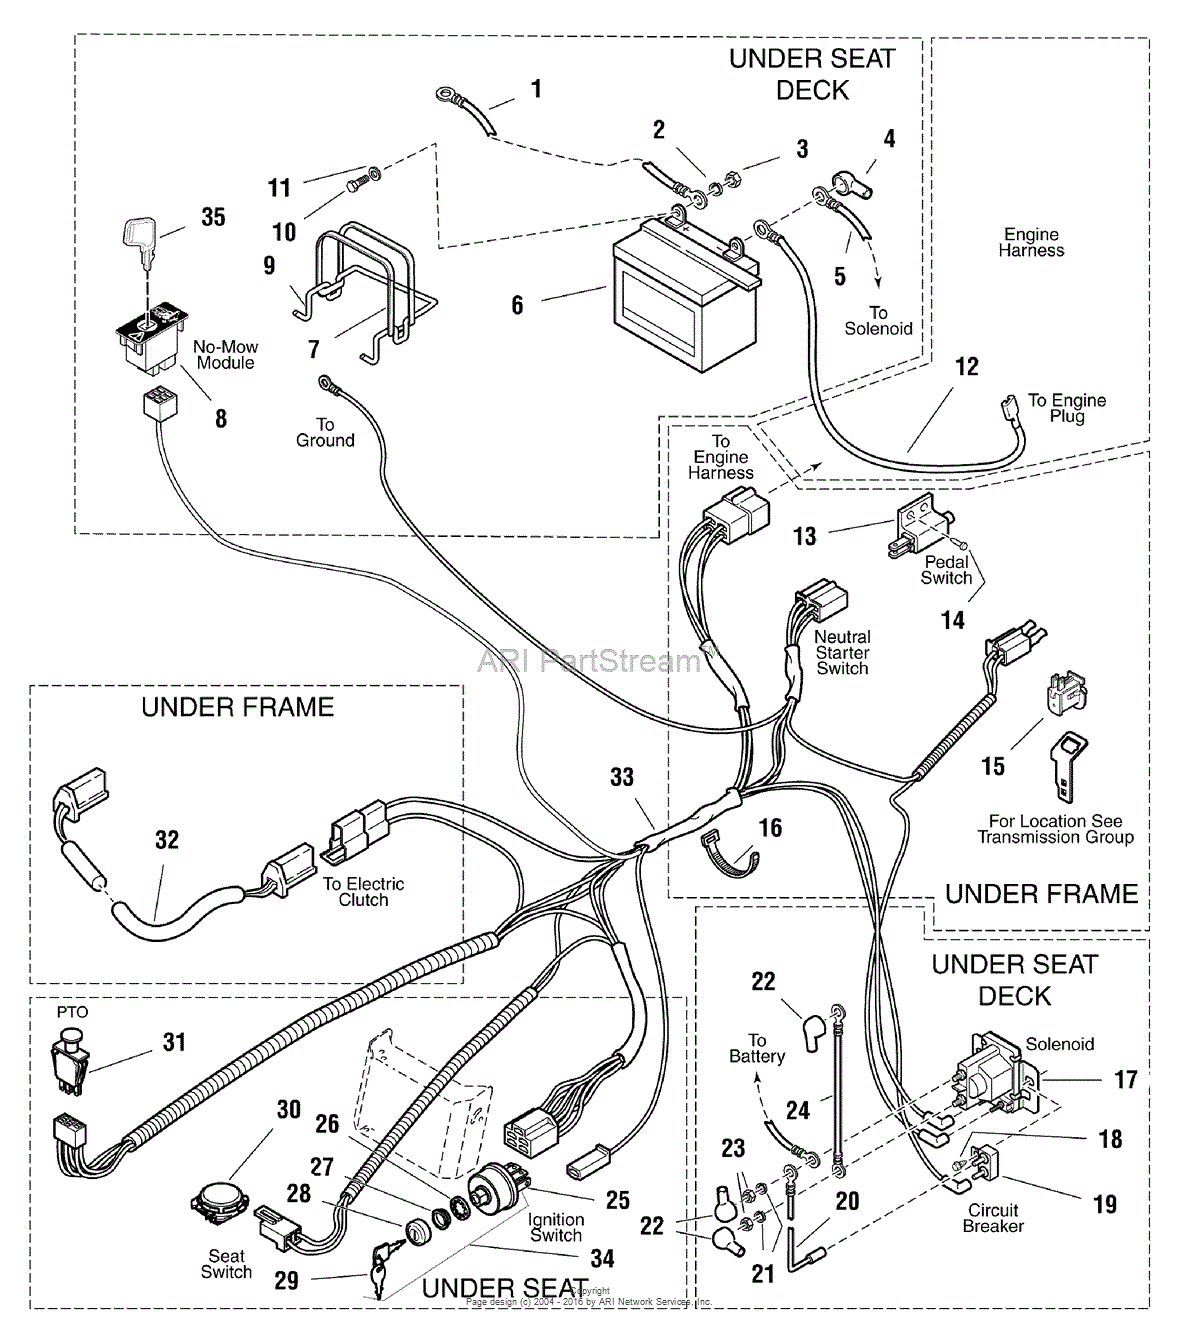 1694291 wiring diagram ignition simplicity